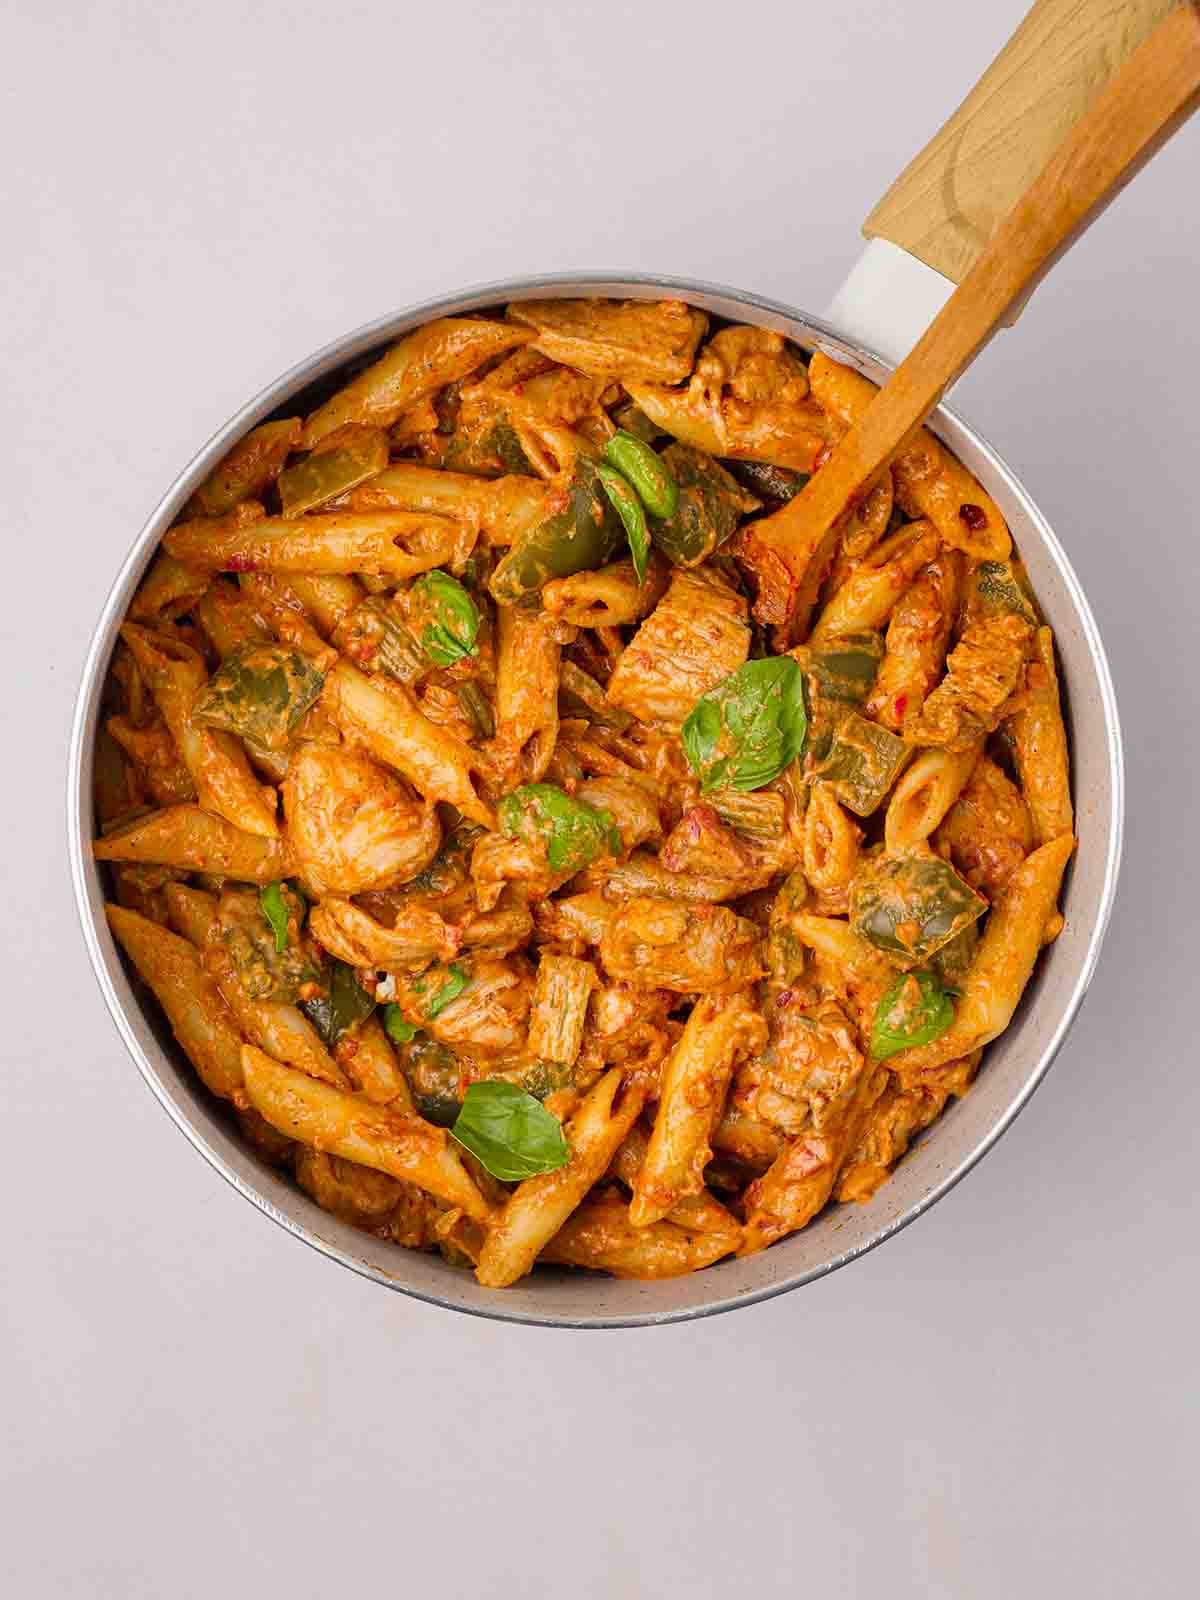 Cooked pasta in a pan with chicken, vegetables and basil on top with a cajun sauce for a one pot recipe.